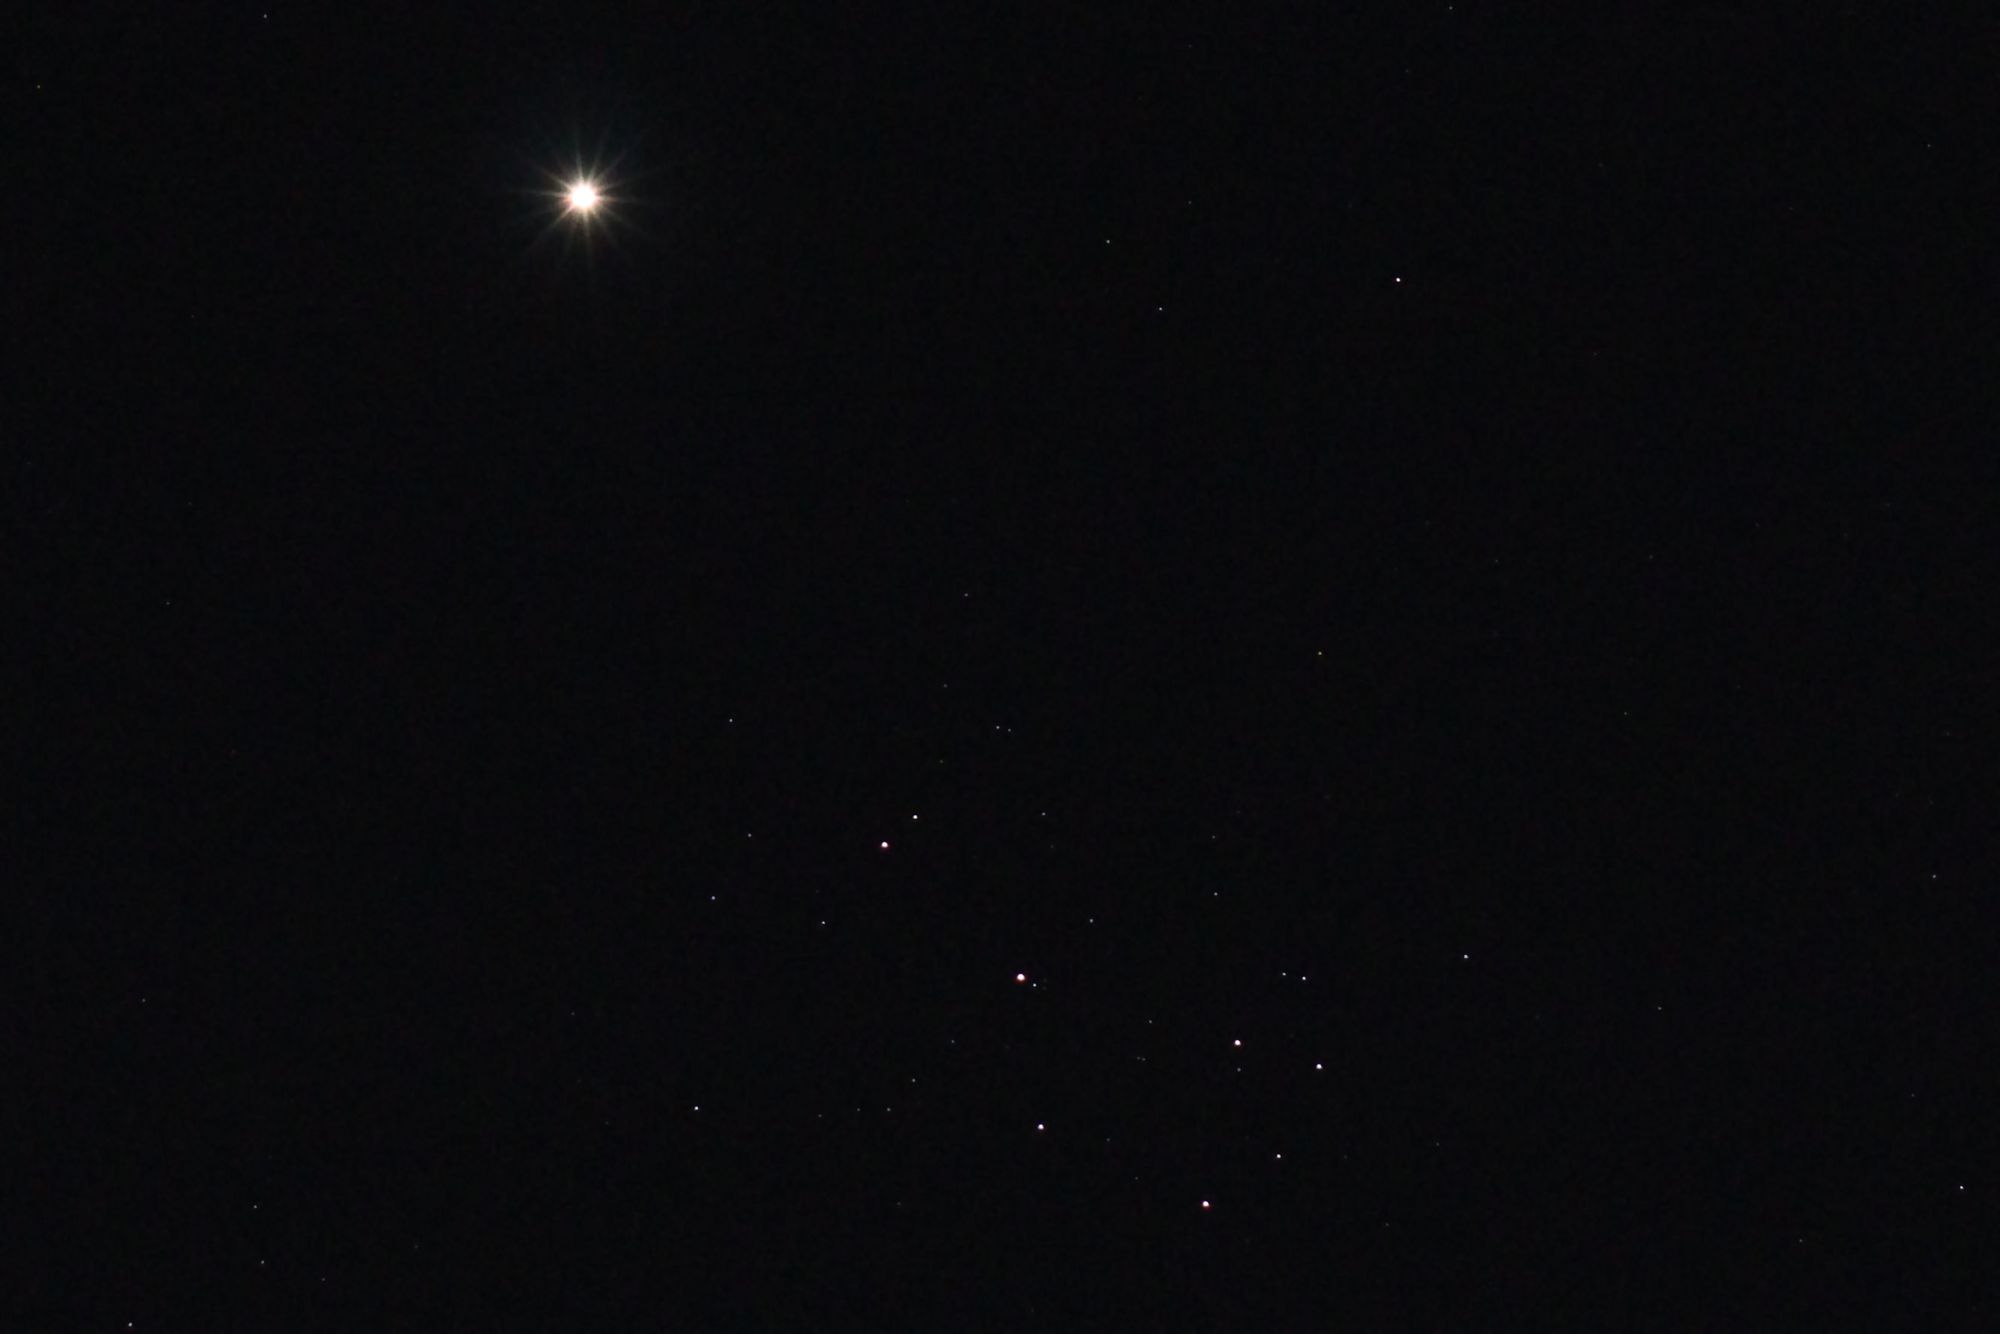 Venus and the Pleiades in April 2020